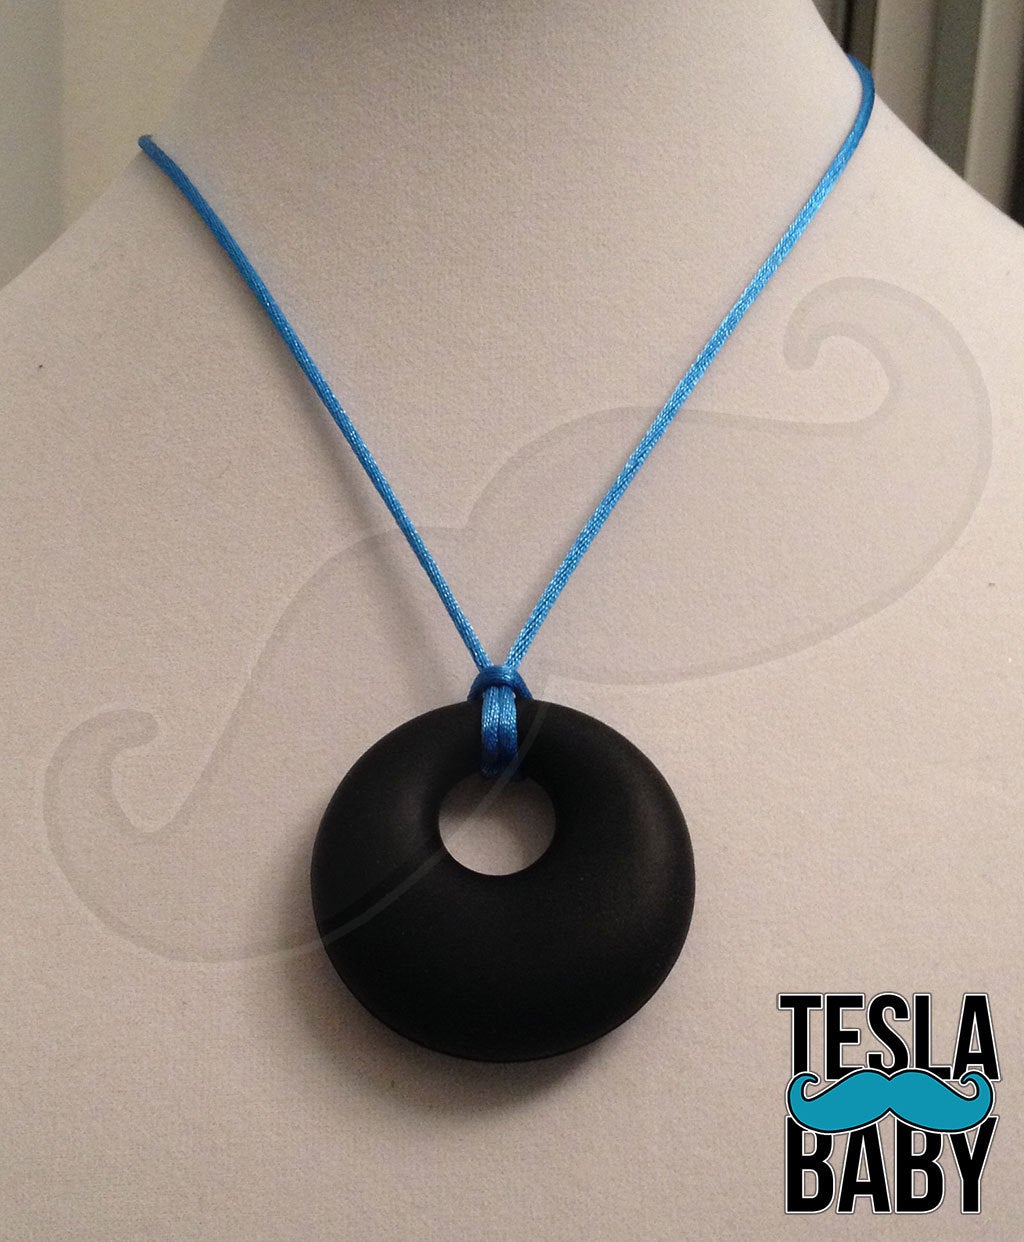 Silicone Pendant Necklace --  A 2 1/8" lavender silicone circular pendant; for fidgeting, sensory play, or teething.